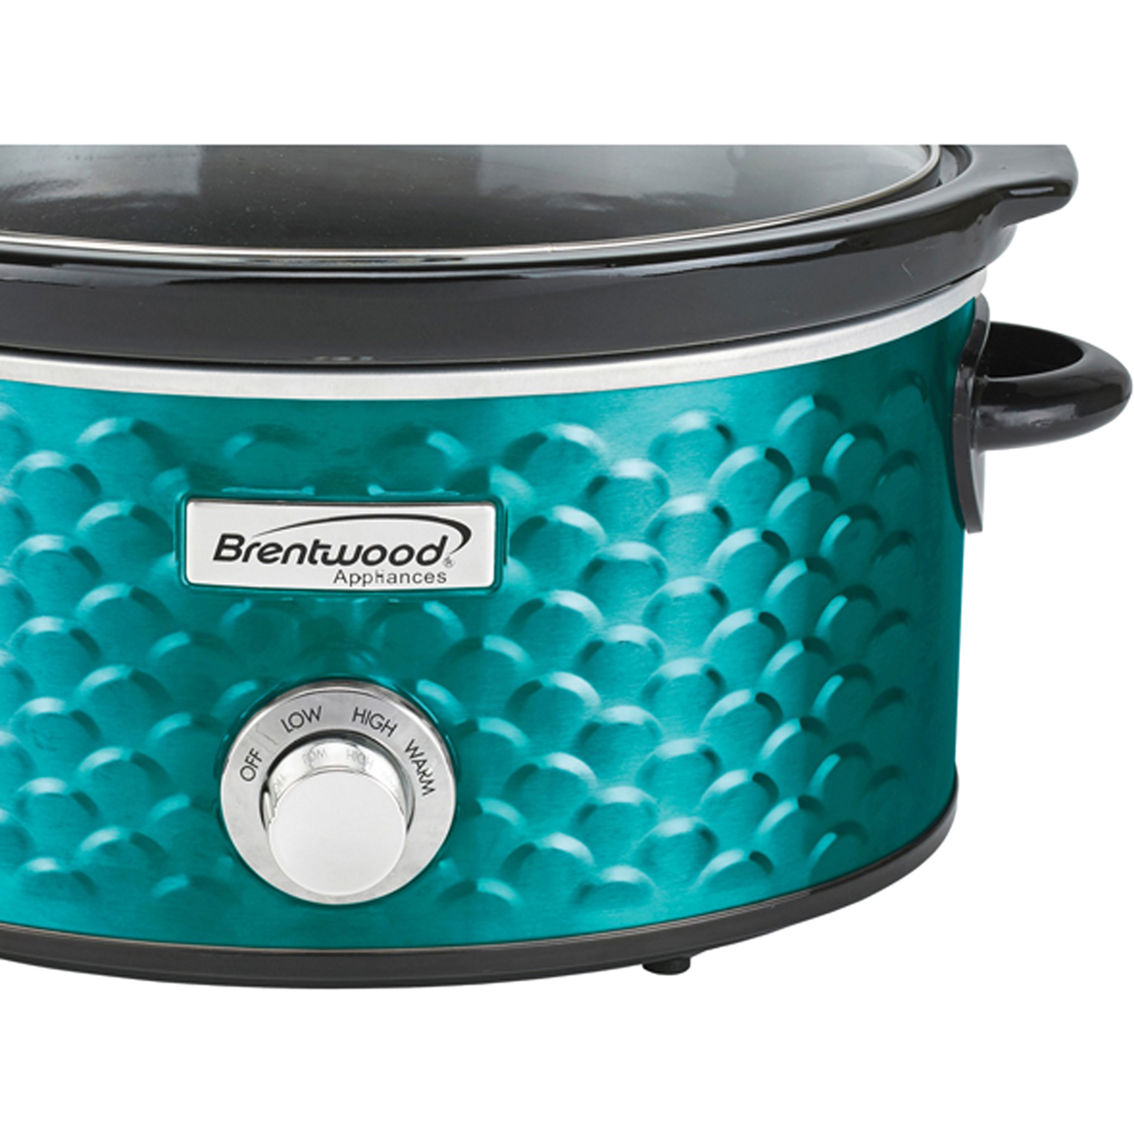 Brentwood 4.5 qt. Scallop Pattern 220W Slow Cooker - Image 3 of 8